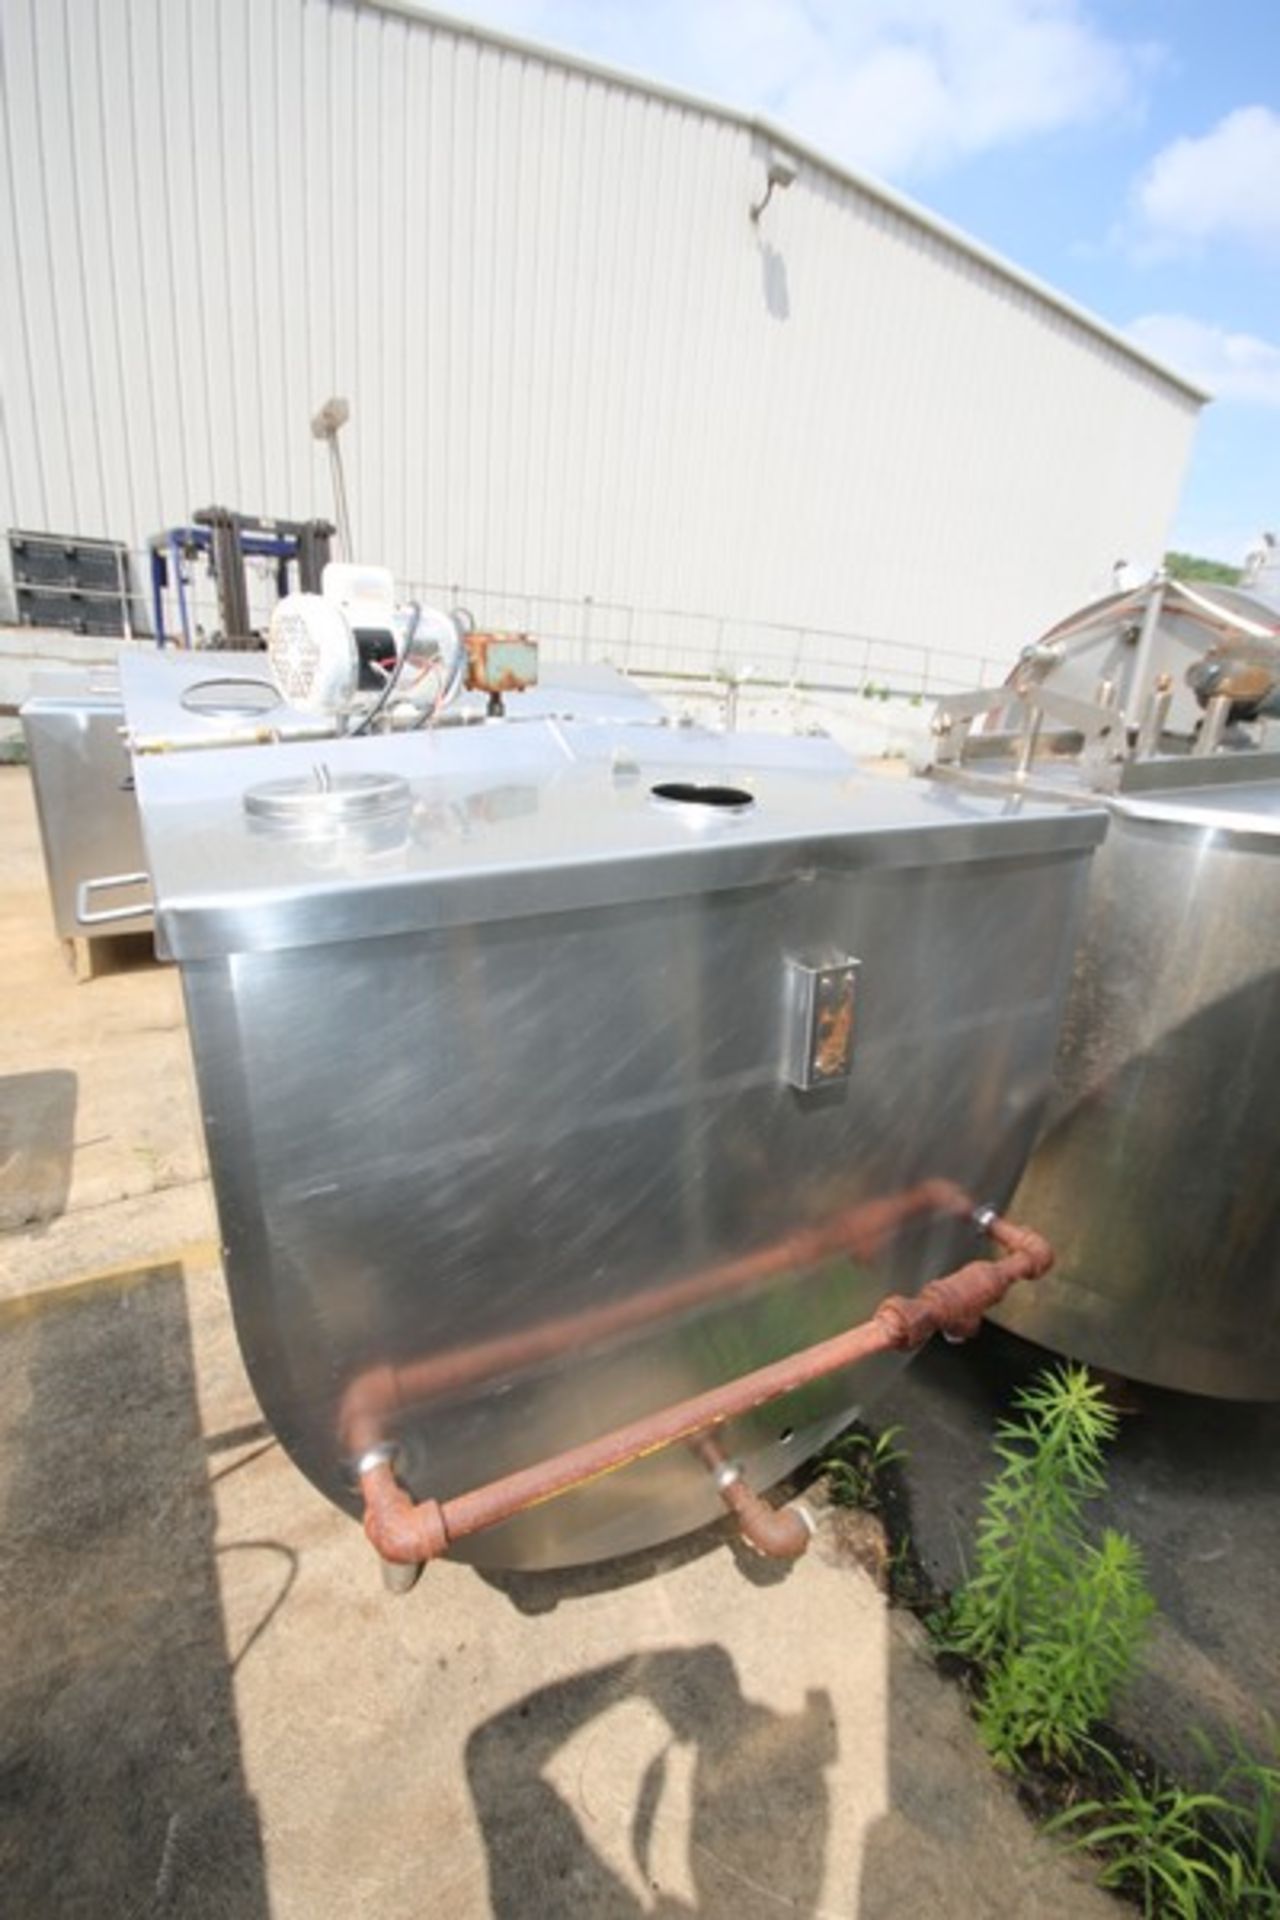 Crepaco 300 Gallon S/S Jacketed Hinged Lid Farm Tank, Model R300, S/N R7916, with .5 hp/1725 rpm - Image 3 of 4